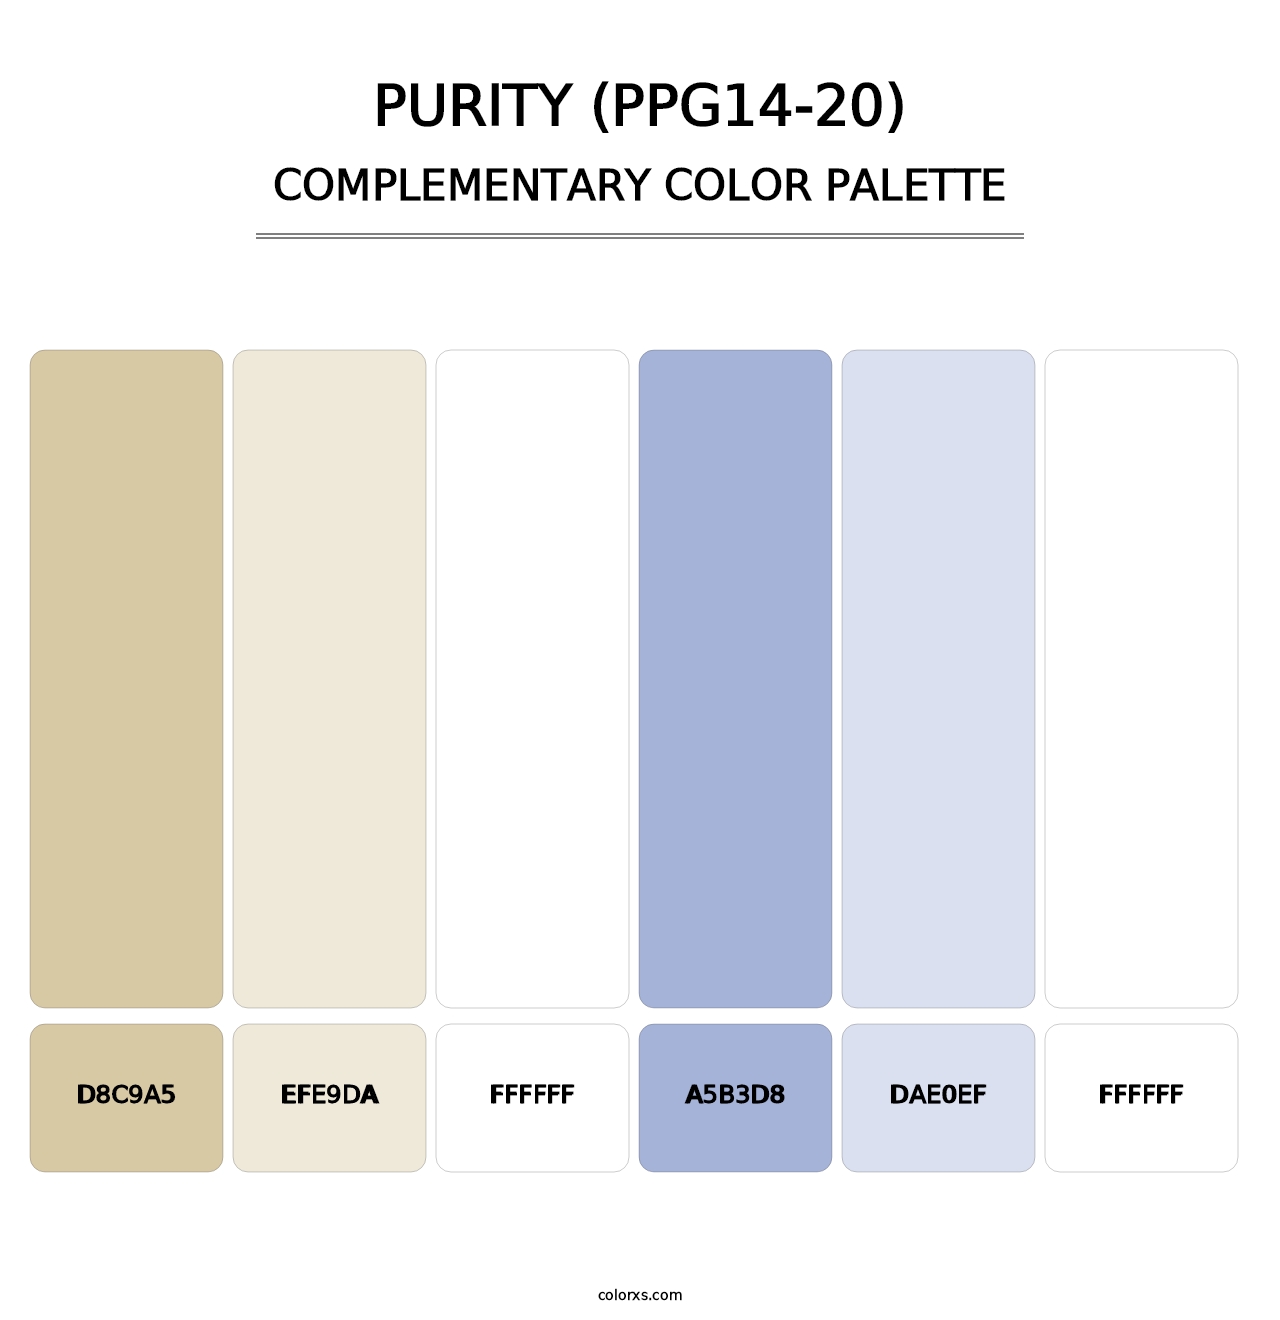 Purity (PPG14-20) - Complementary Color Palette